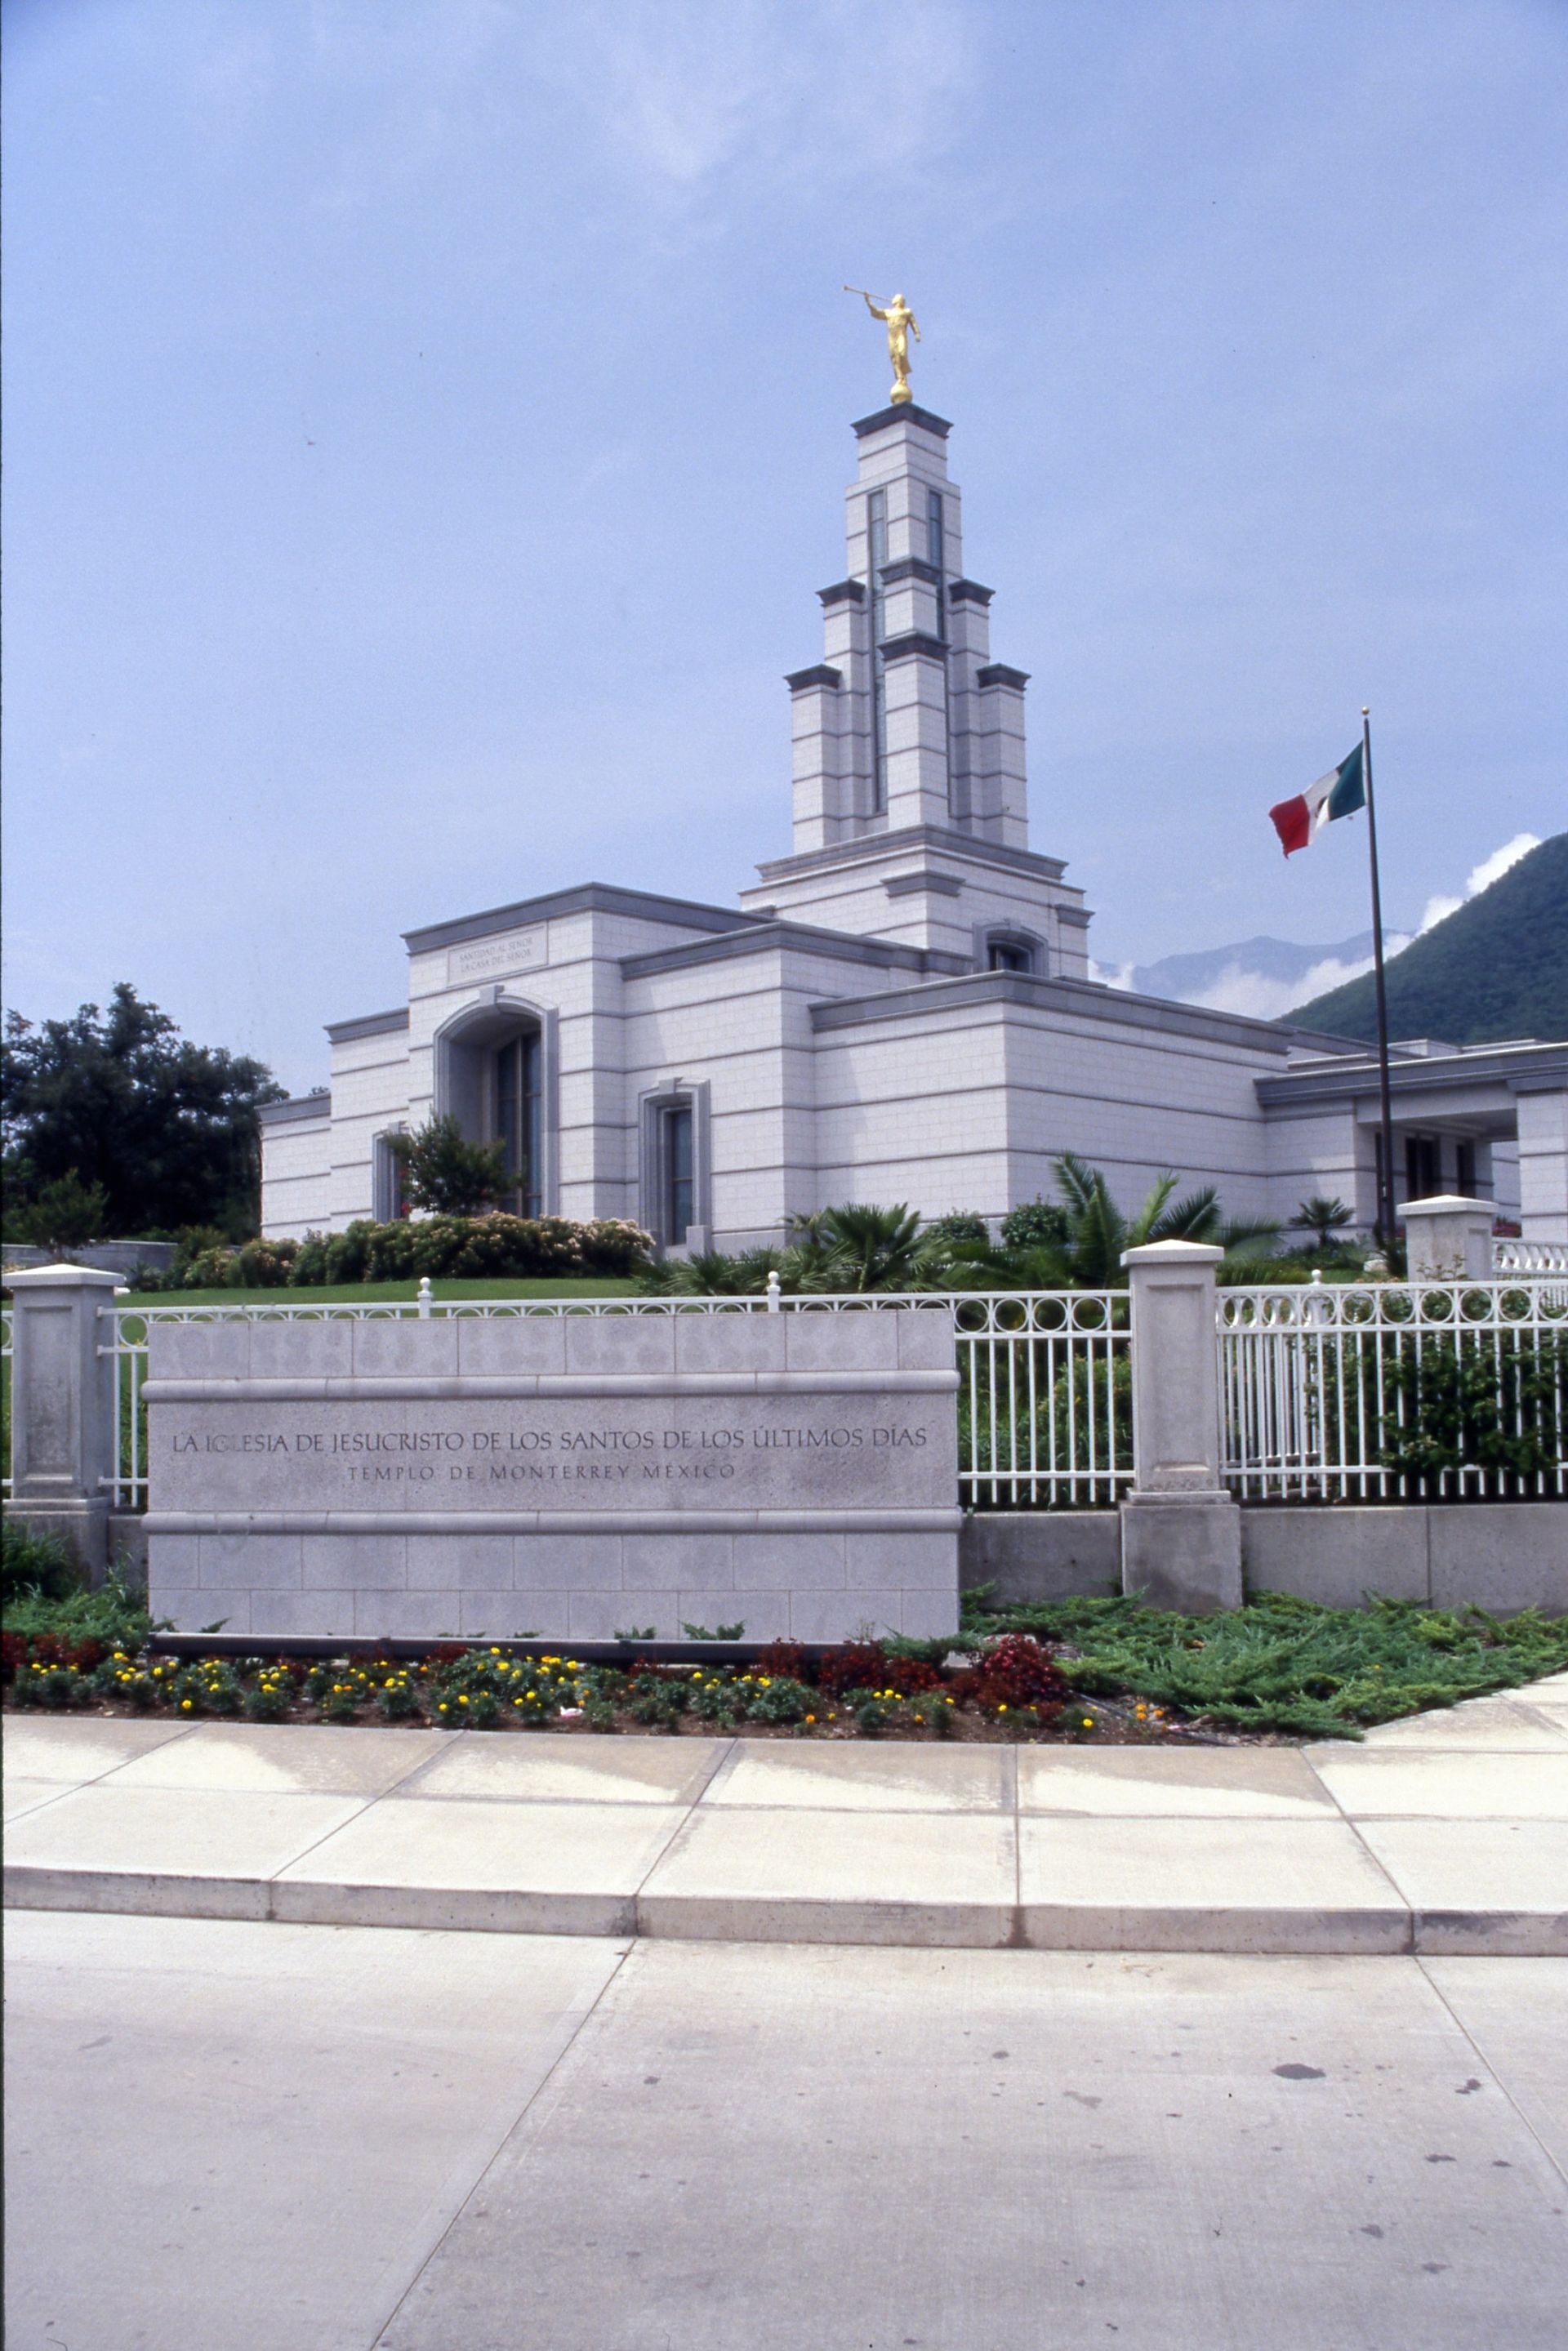 The Monterrey Mexico Temple name sign, including the entrance and scenery.  